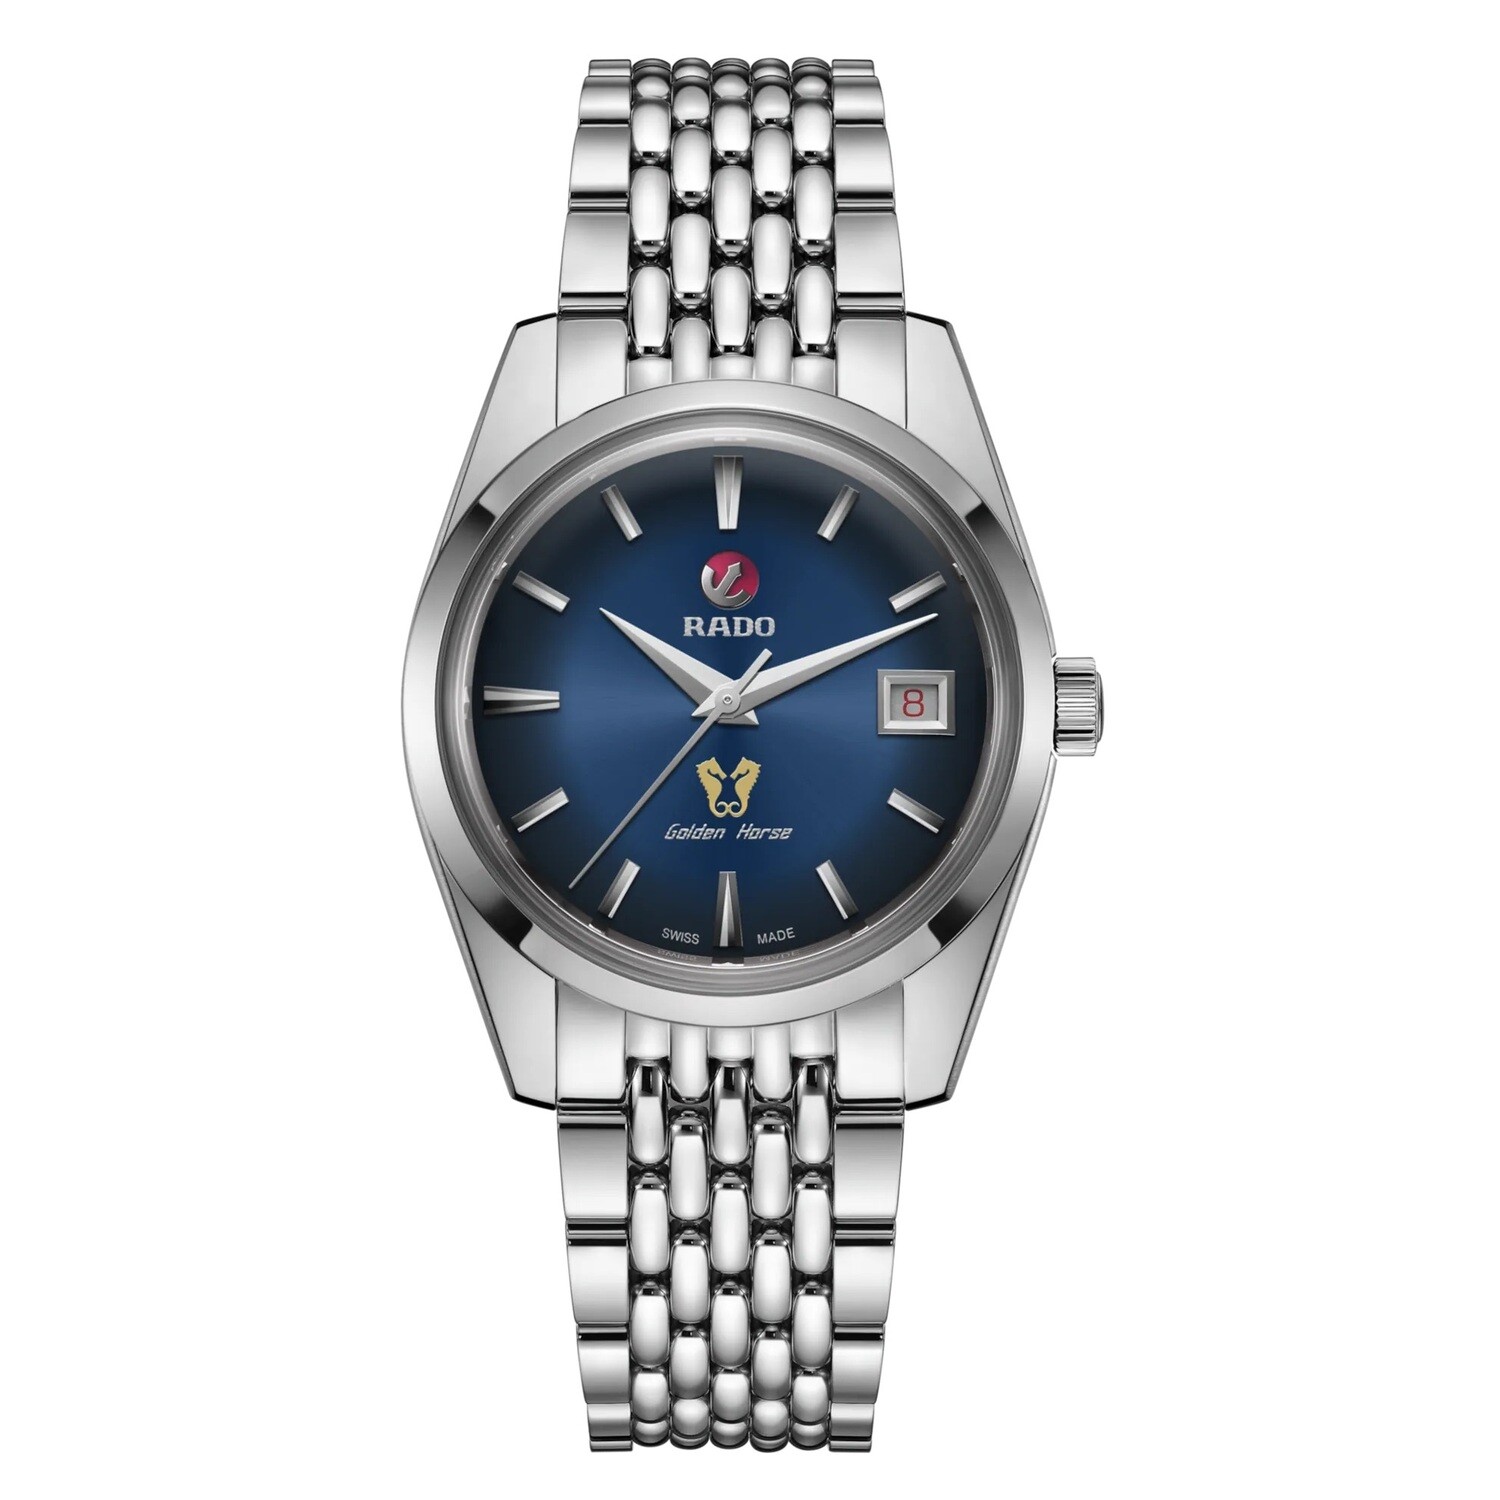 ​Rado Golden Horse Automatic R33930203 unisex 37mm Limited Edition Sapphire glass anti-reflective ST Steel Blue Dial Men's Watch 50m WR SWISS MADE